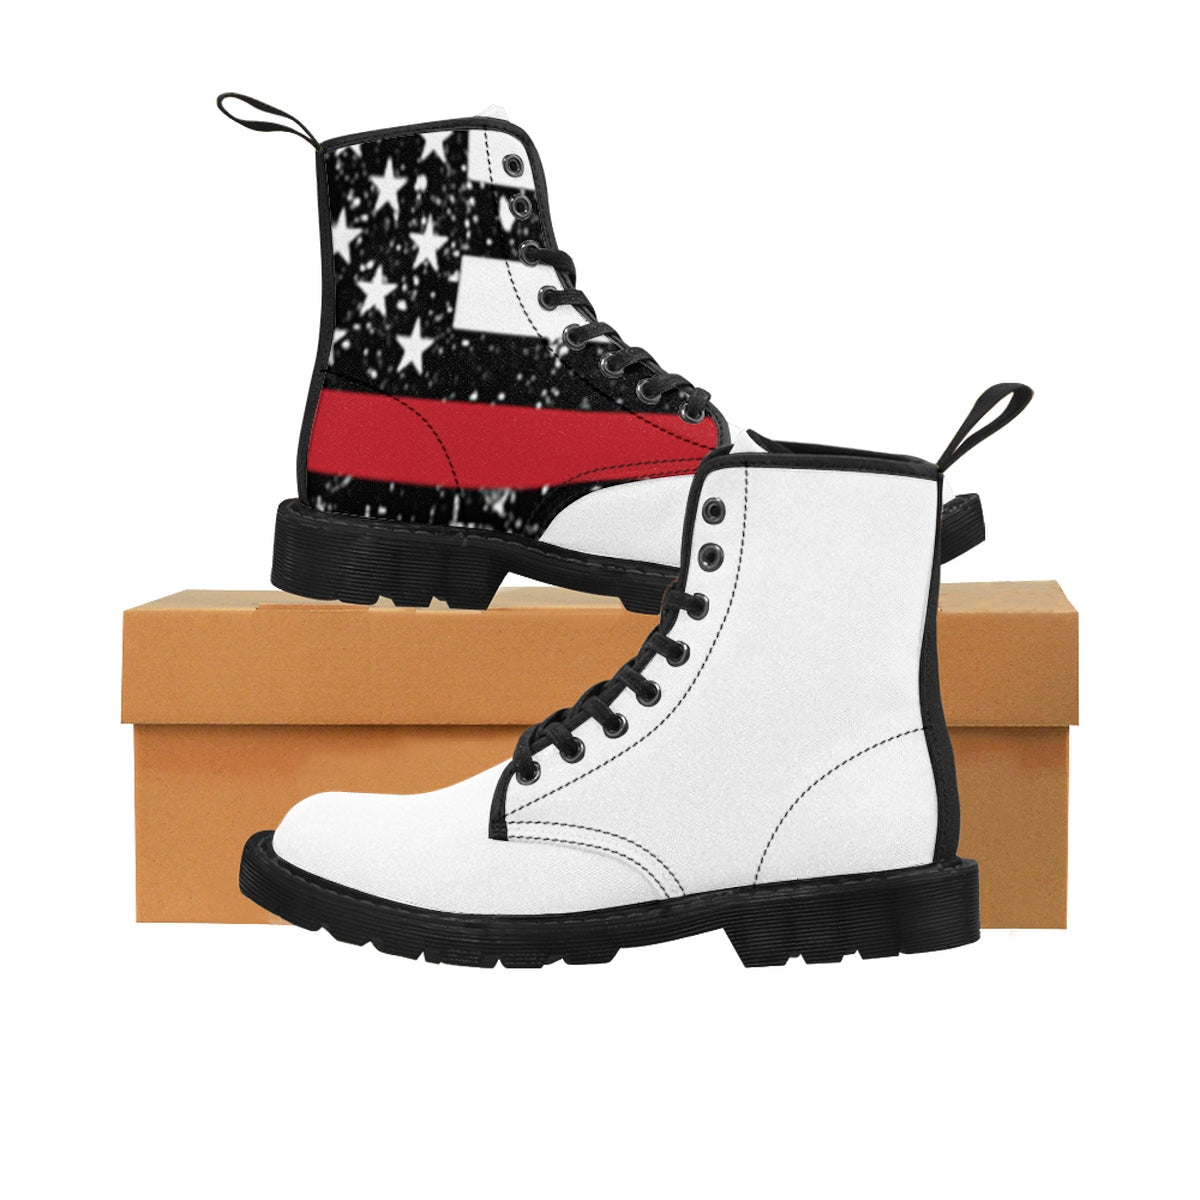 thin red line boots